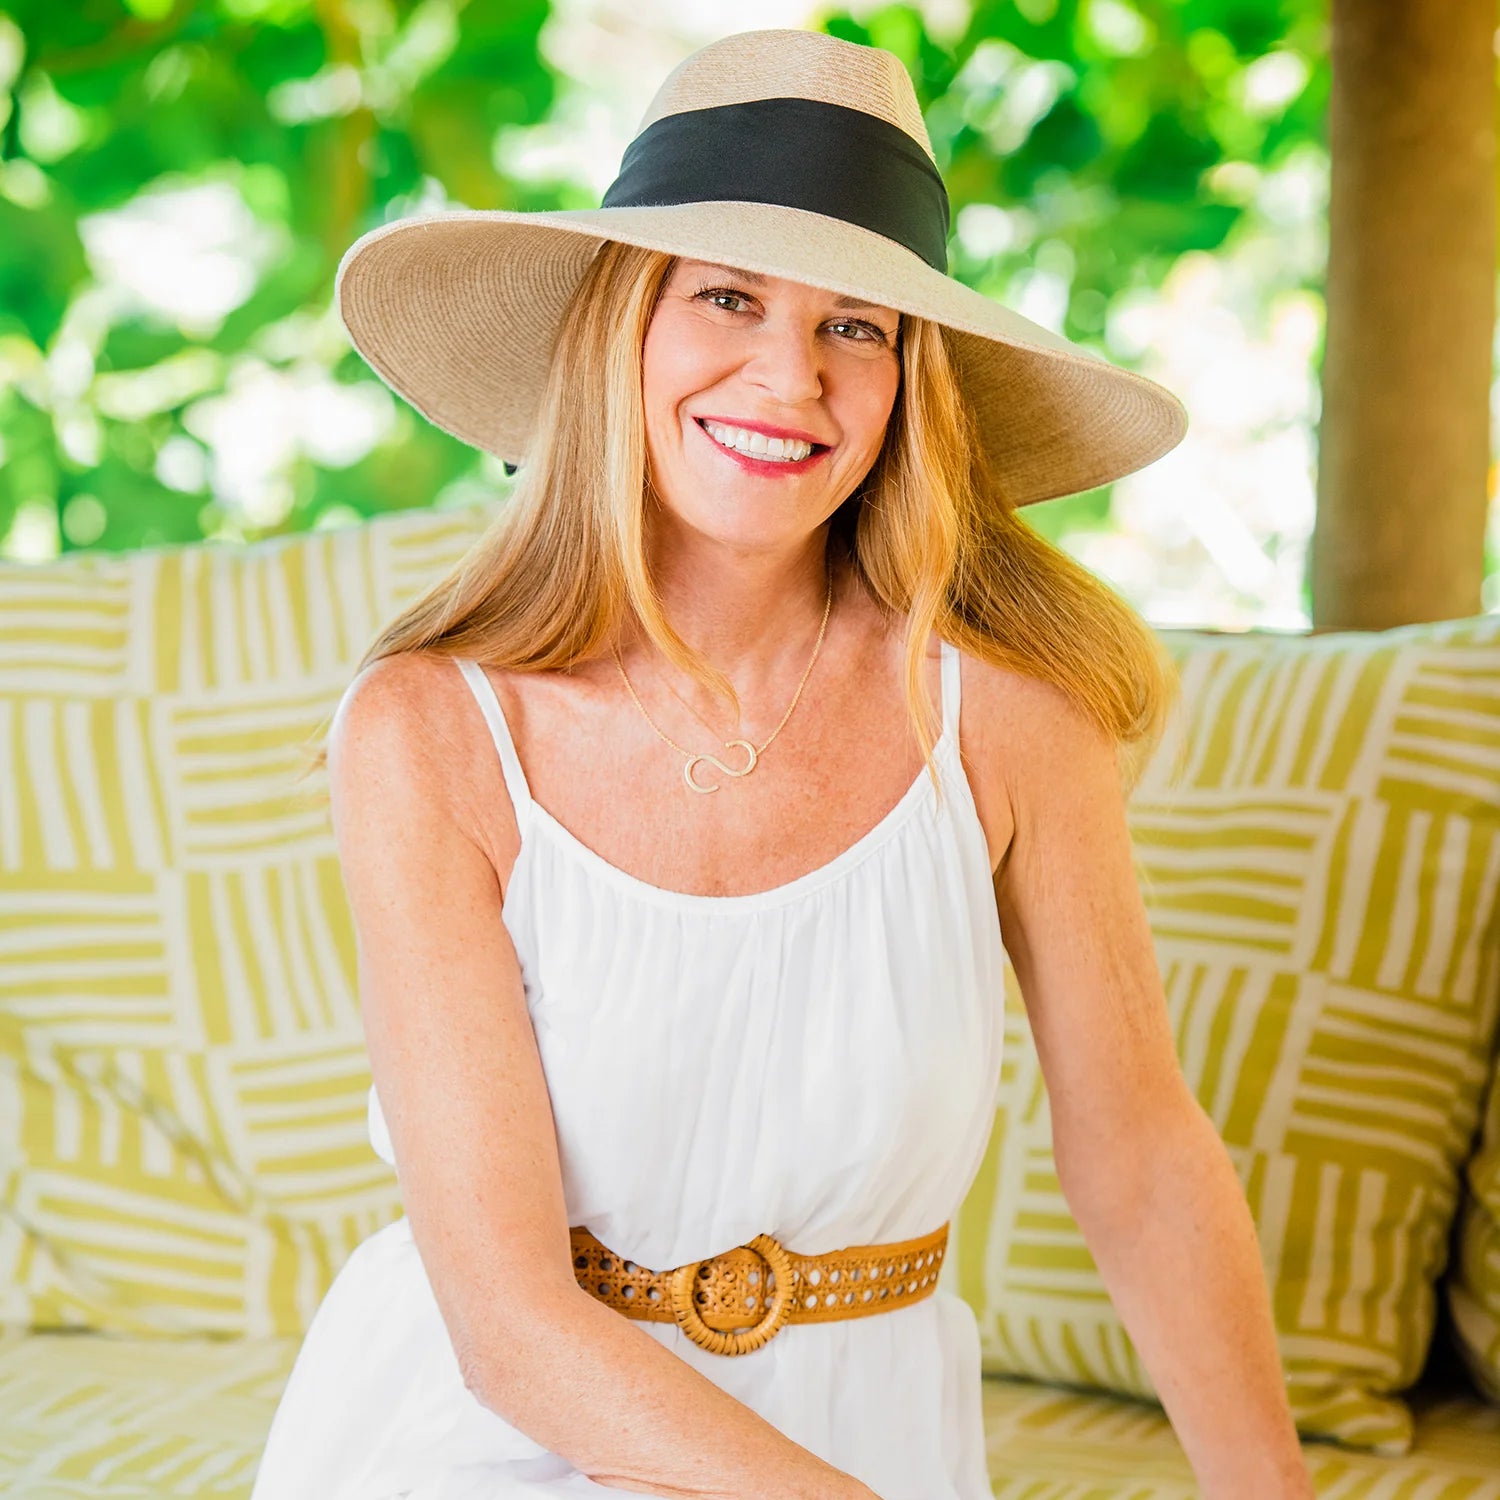 Inspired by the timeless romance movie, “Somewhere in Time,” starring Jane Seymour, this impressive hat has a sweeping brim for enchanting walks by the sea. Sun protection at its finest.